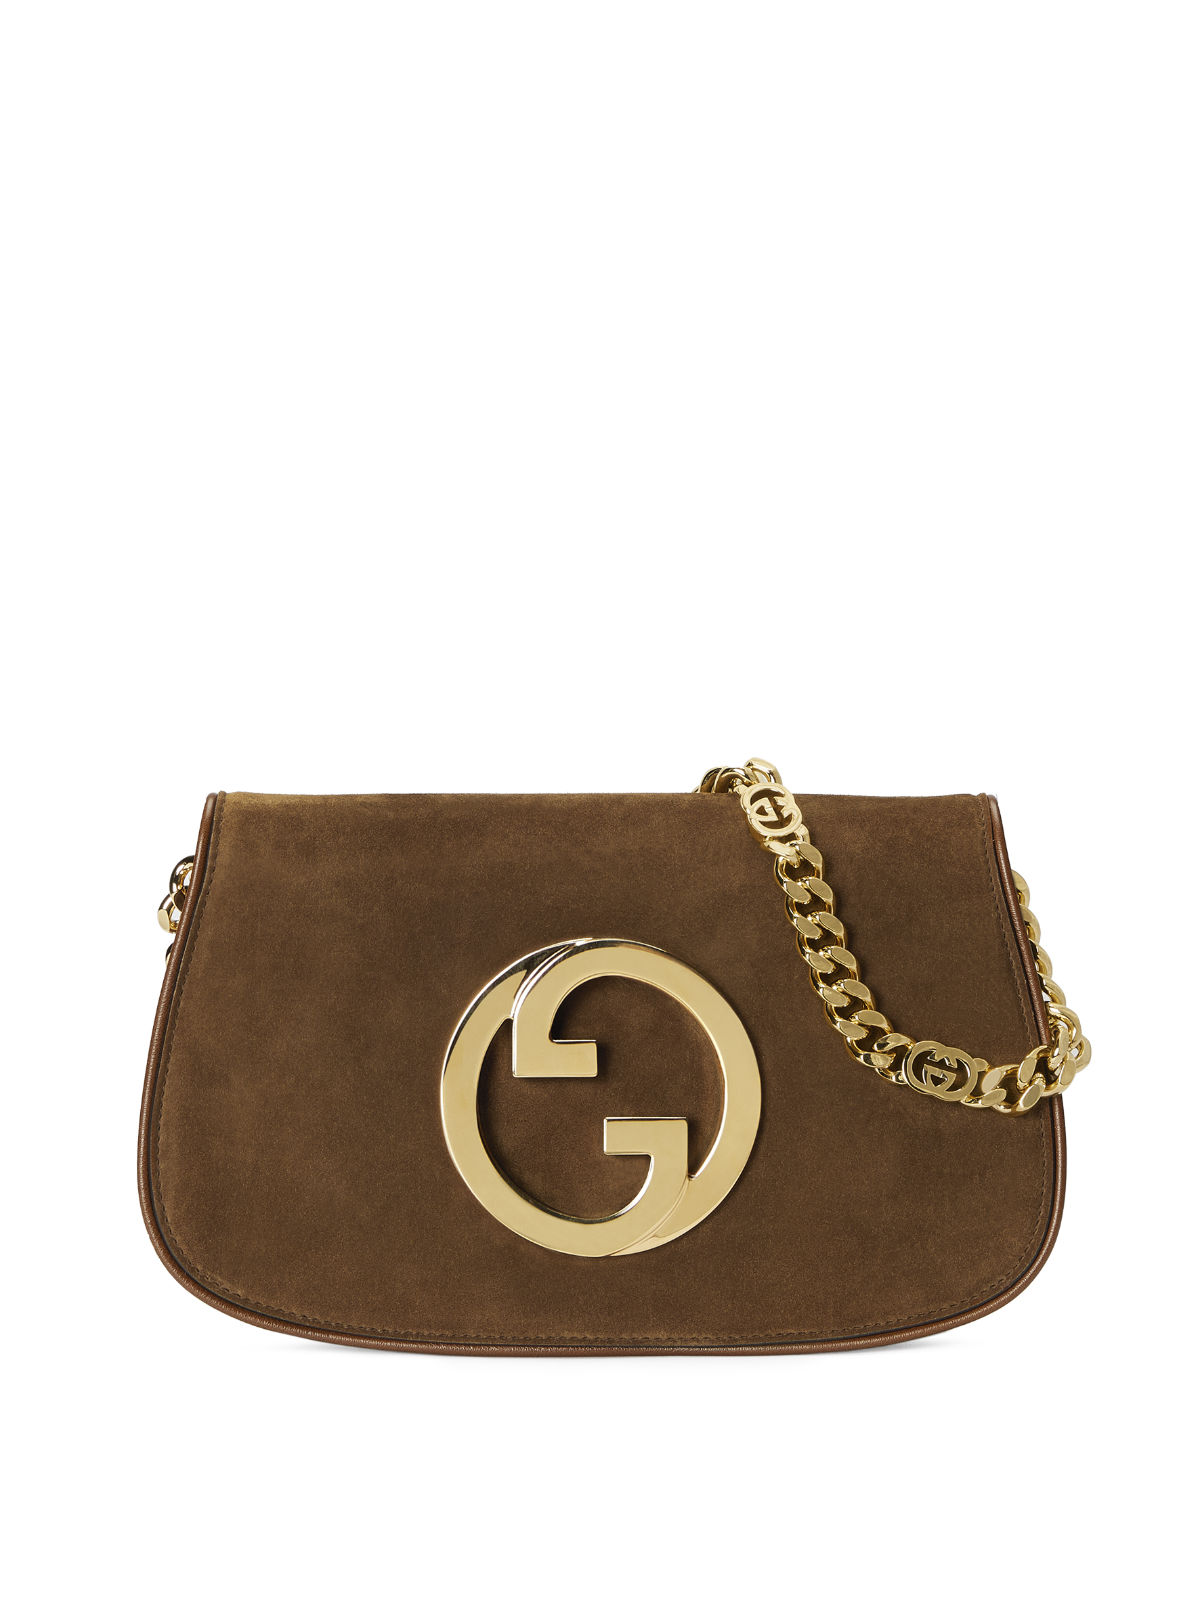 Gucci Blondie: A New Line Of Handbags